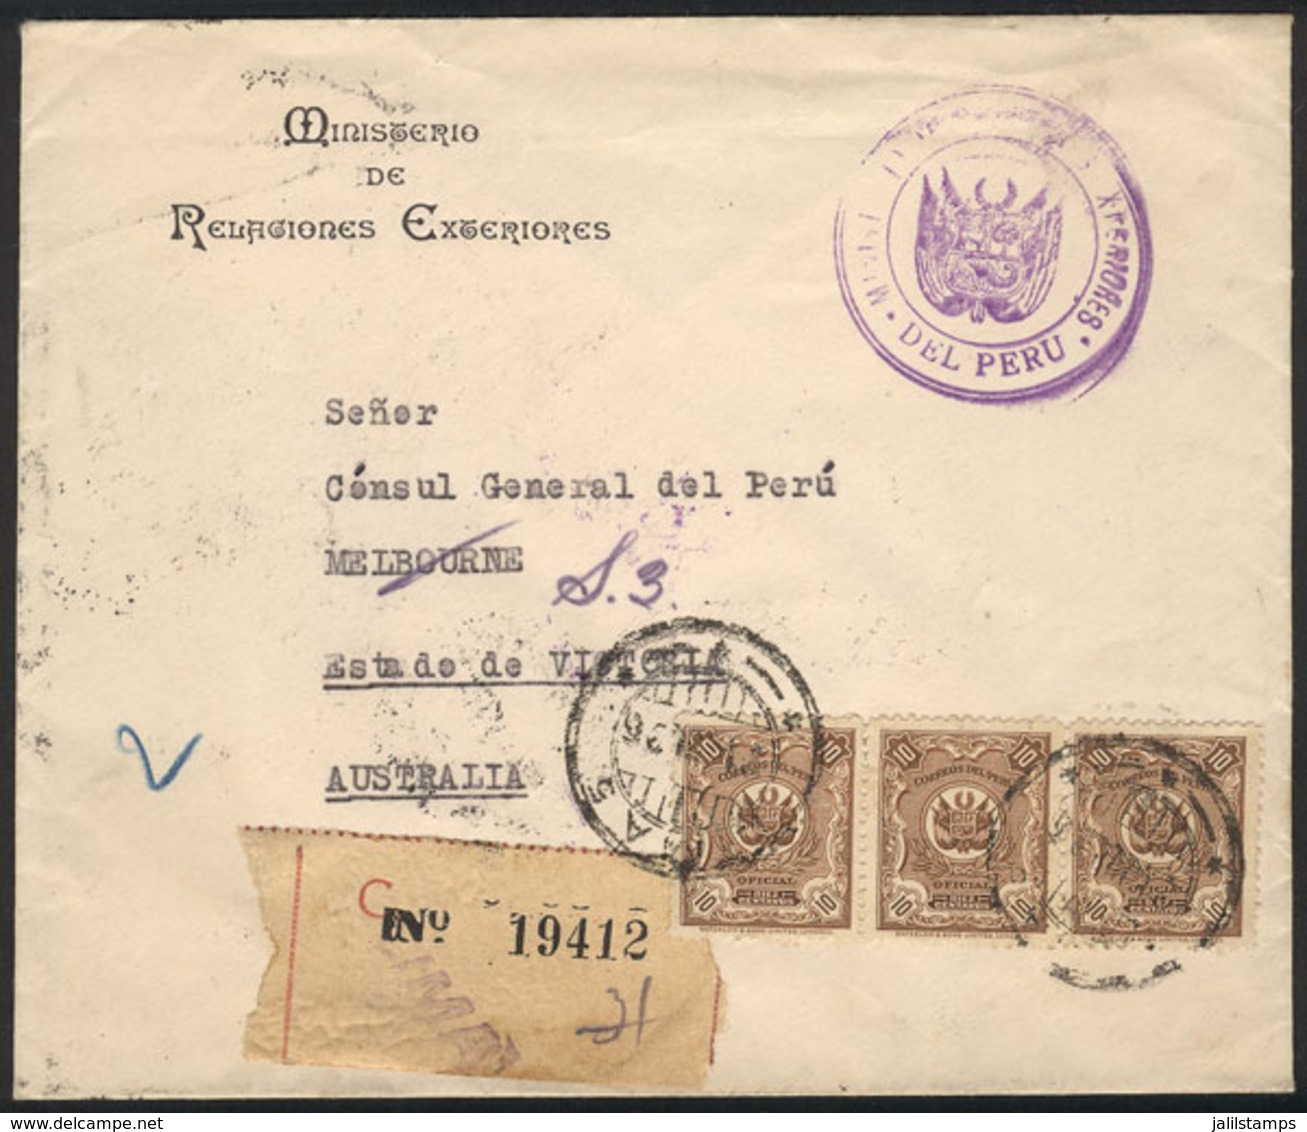 PERU: Official Cover Franked With Official Stamps (10c. In Strip Of 3), Sent By Registered Mail From Lima To AUSTRALIA O - Peru